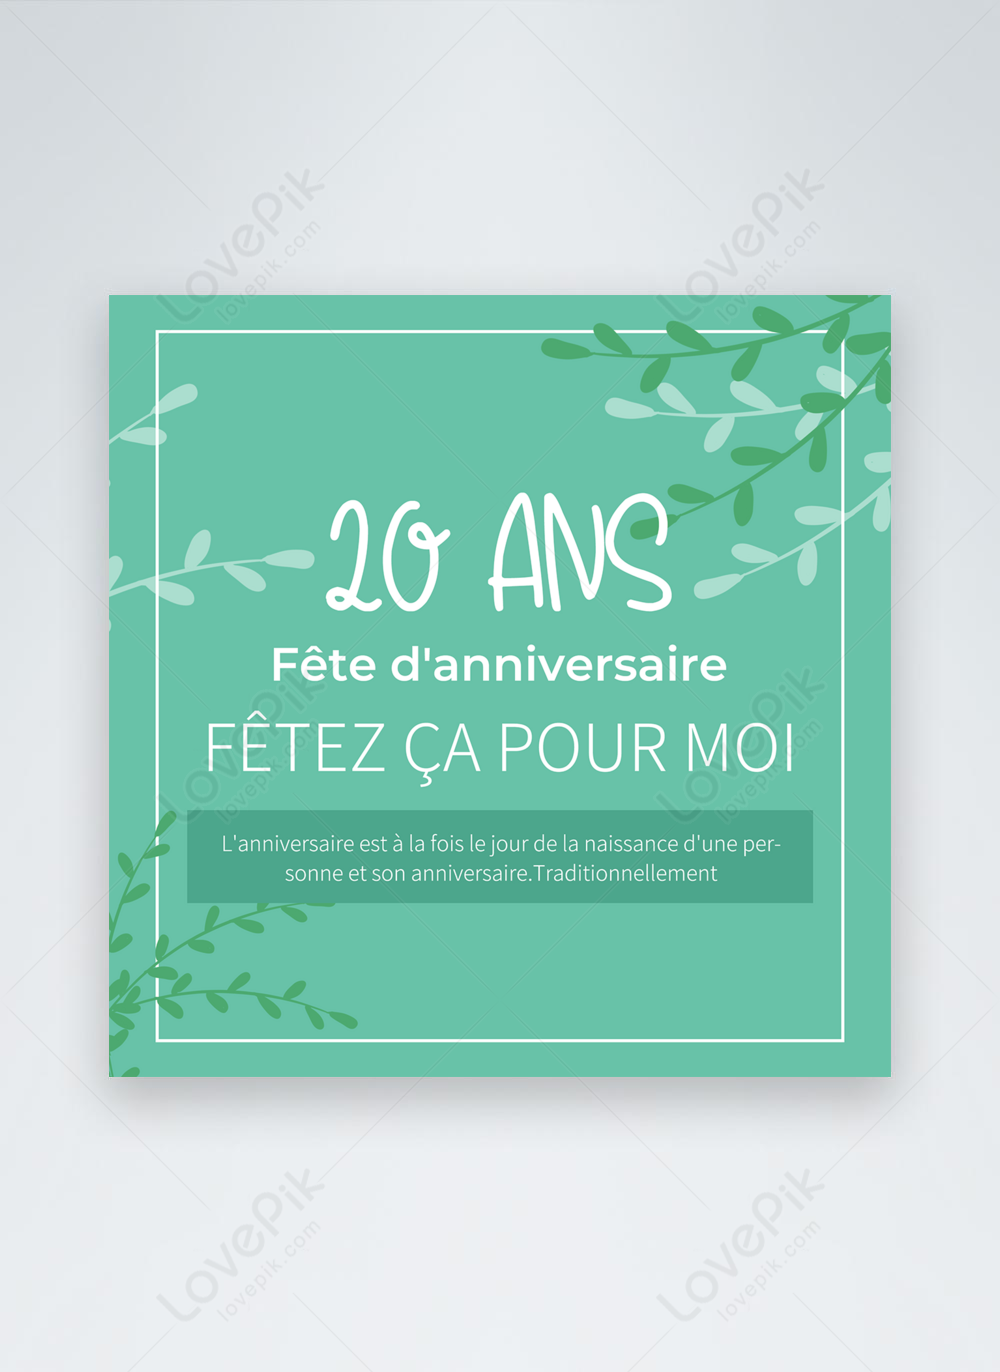 green-background-creative-birthday-party-poster-template-image-picture